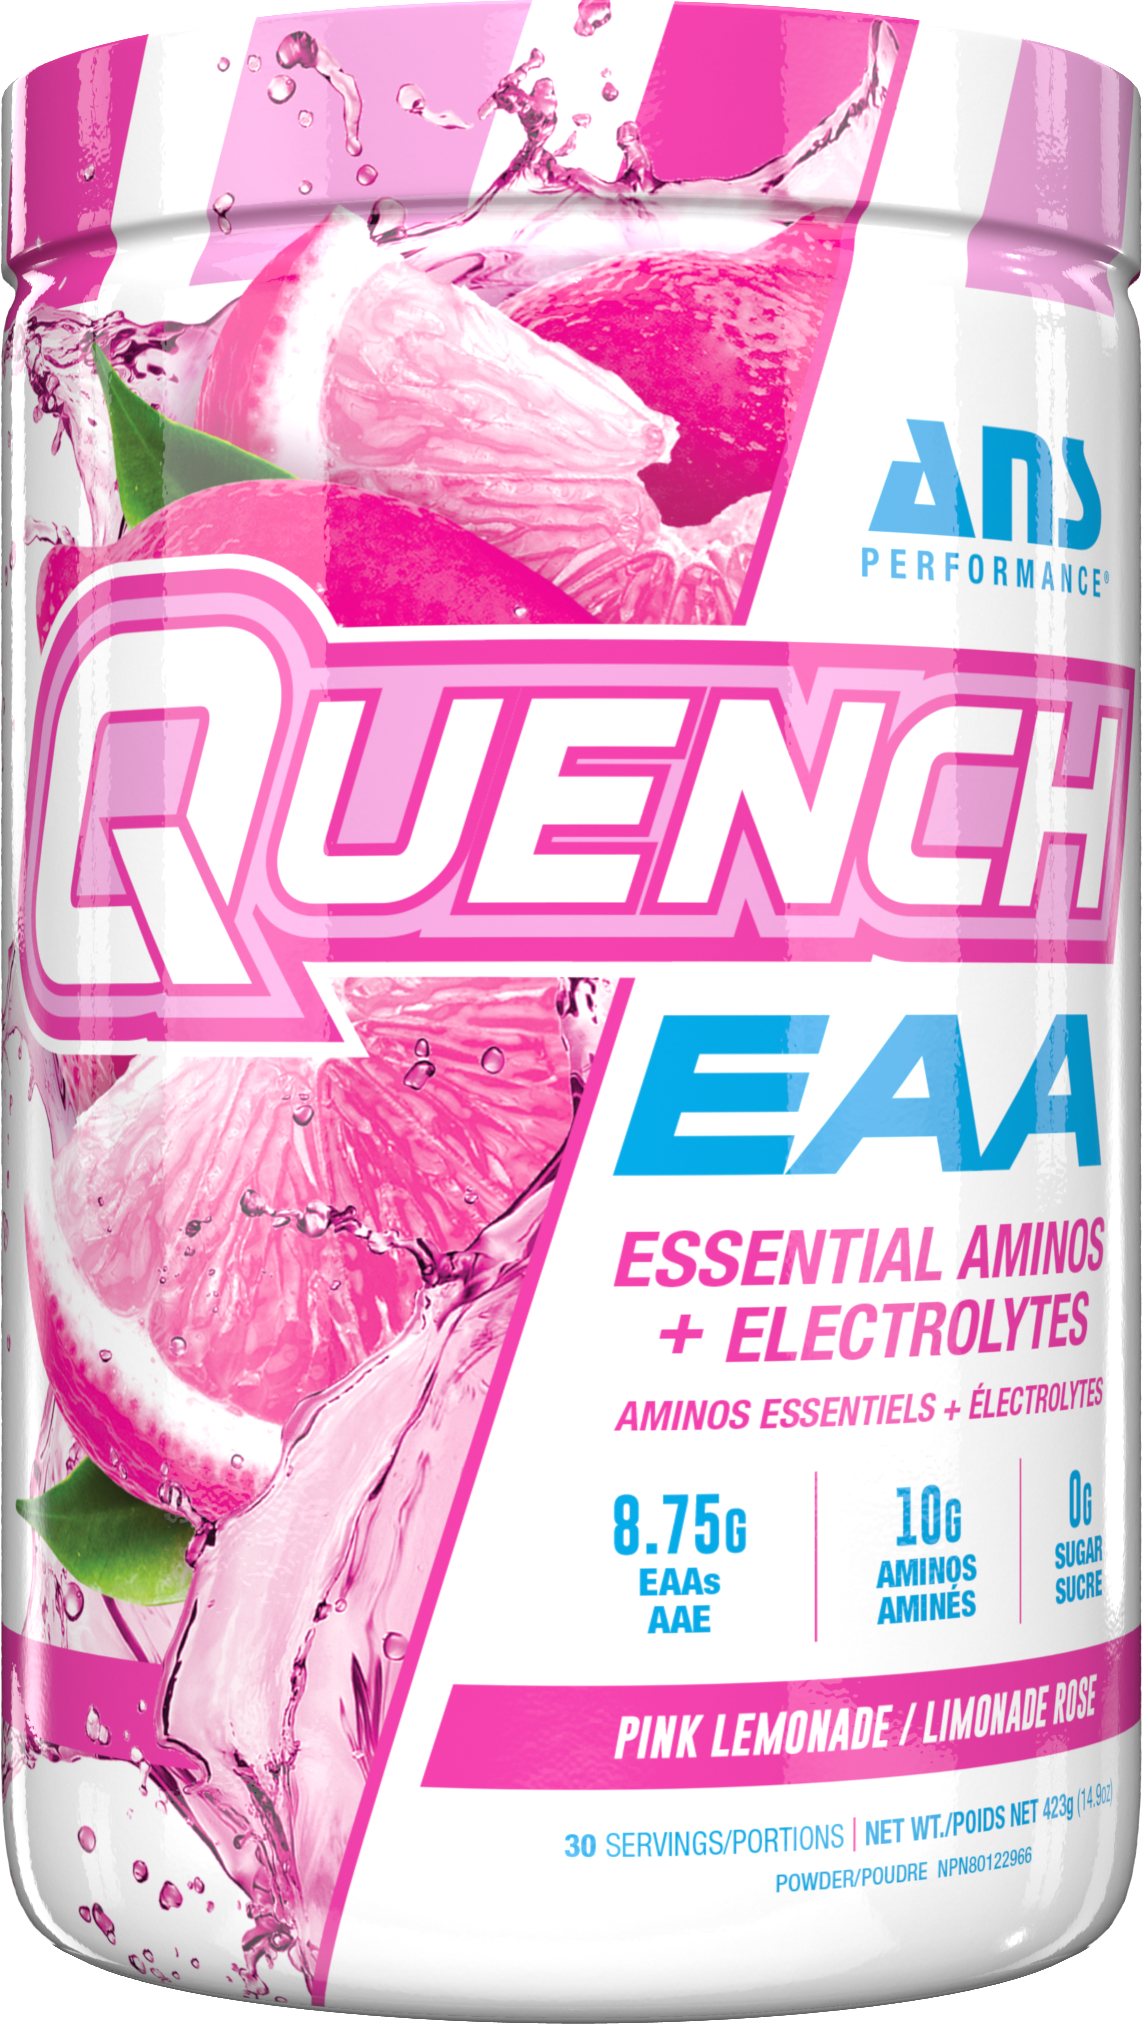 Ans Performance - Quench EAA Essentiel Amino Acid + Electrolytes - 30 serving